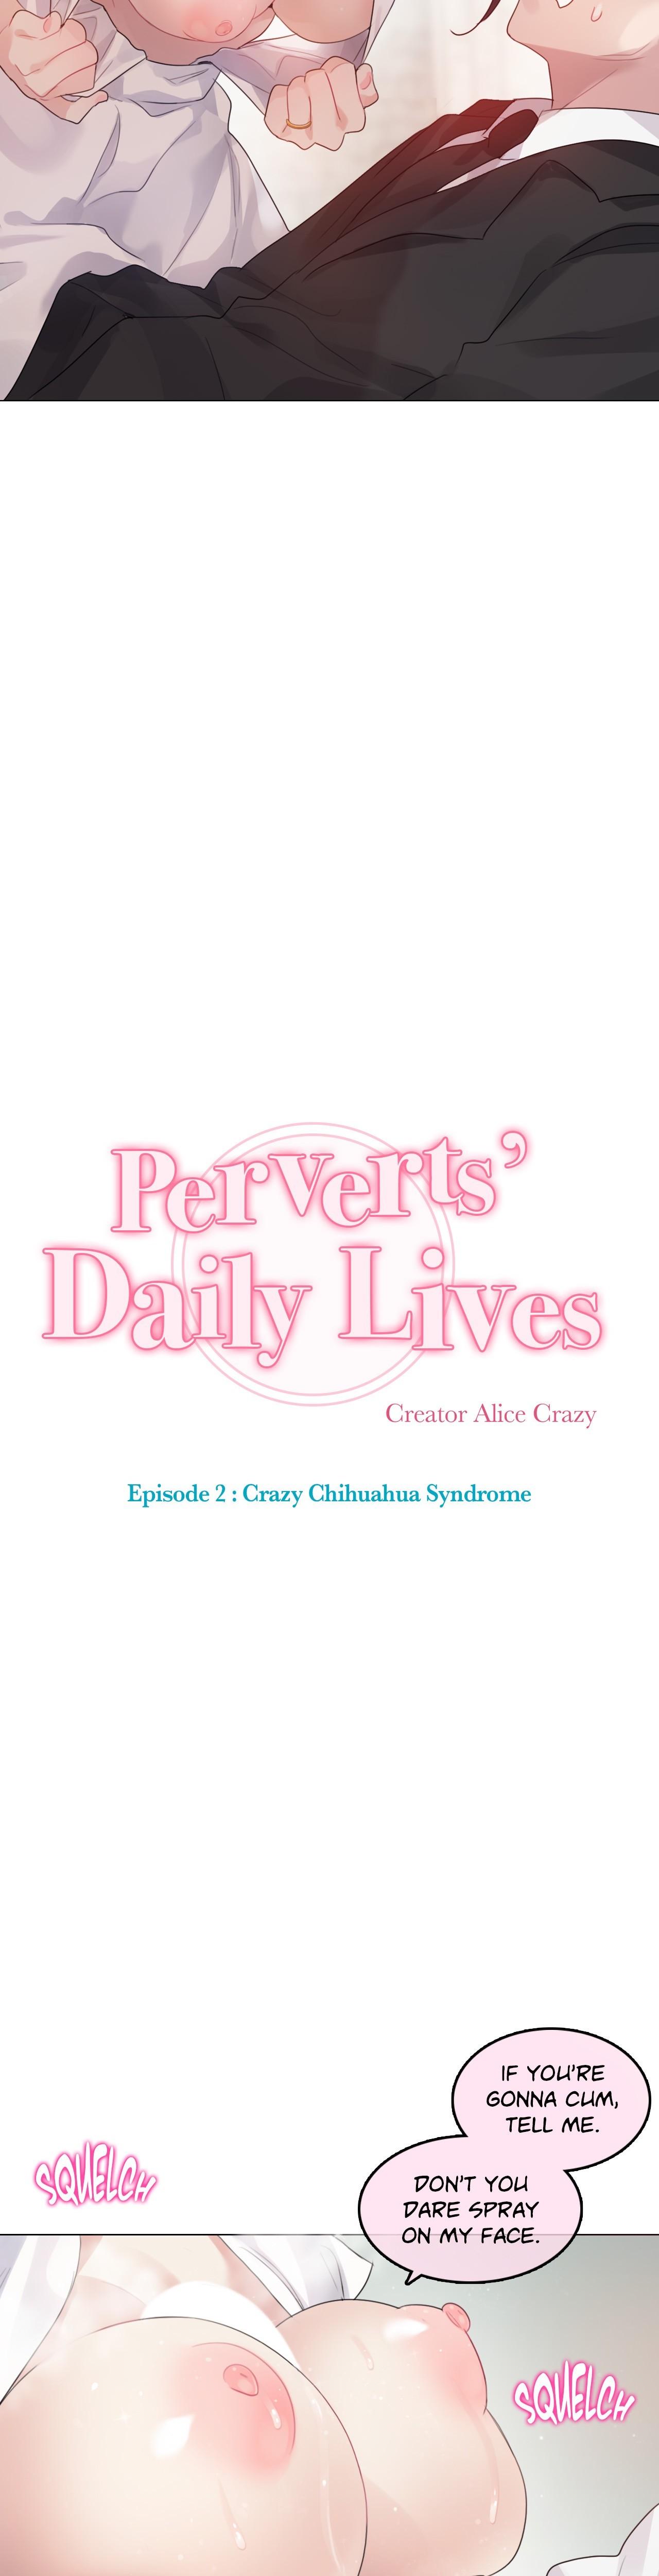 Perverts' Daily Lives Episode 2: Crazy Chihuahua Syndrome 444